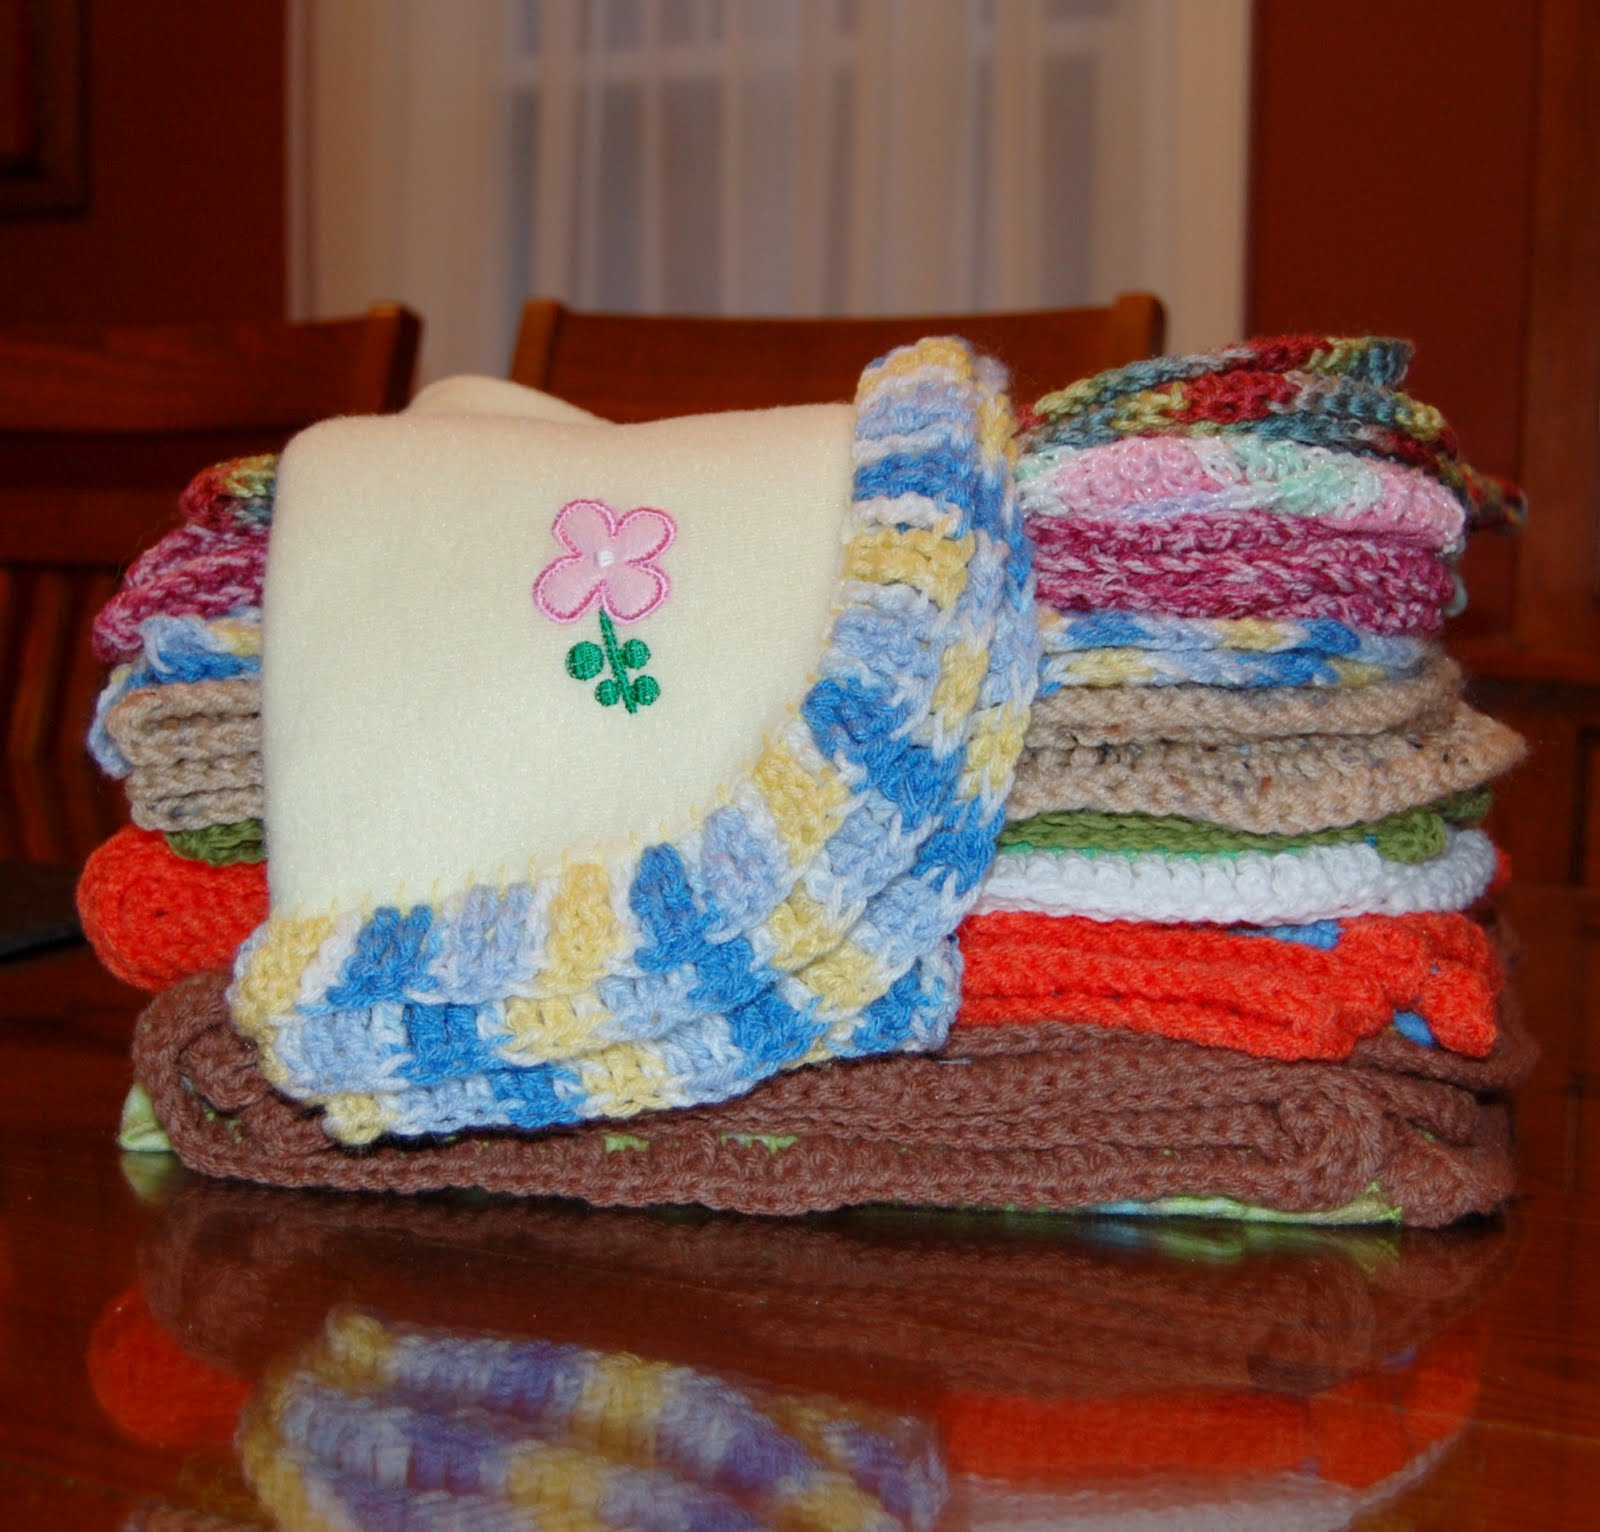 Crochet For A Cause: Project Linus | Petals To Picots